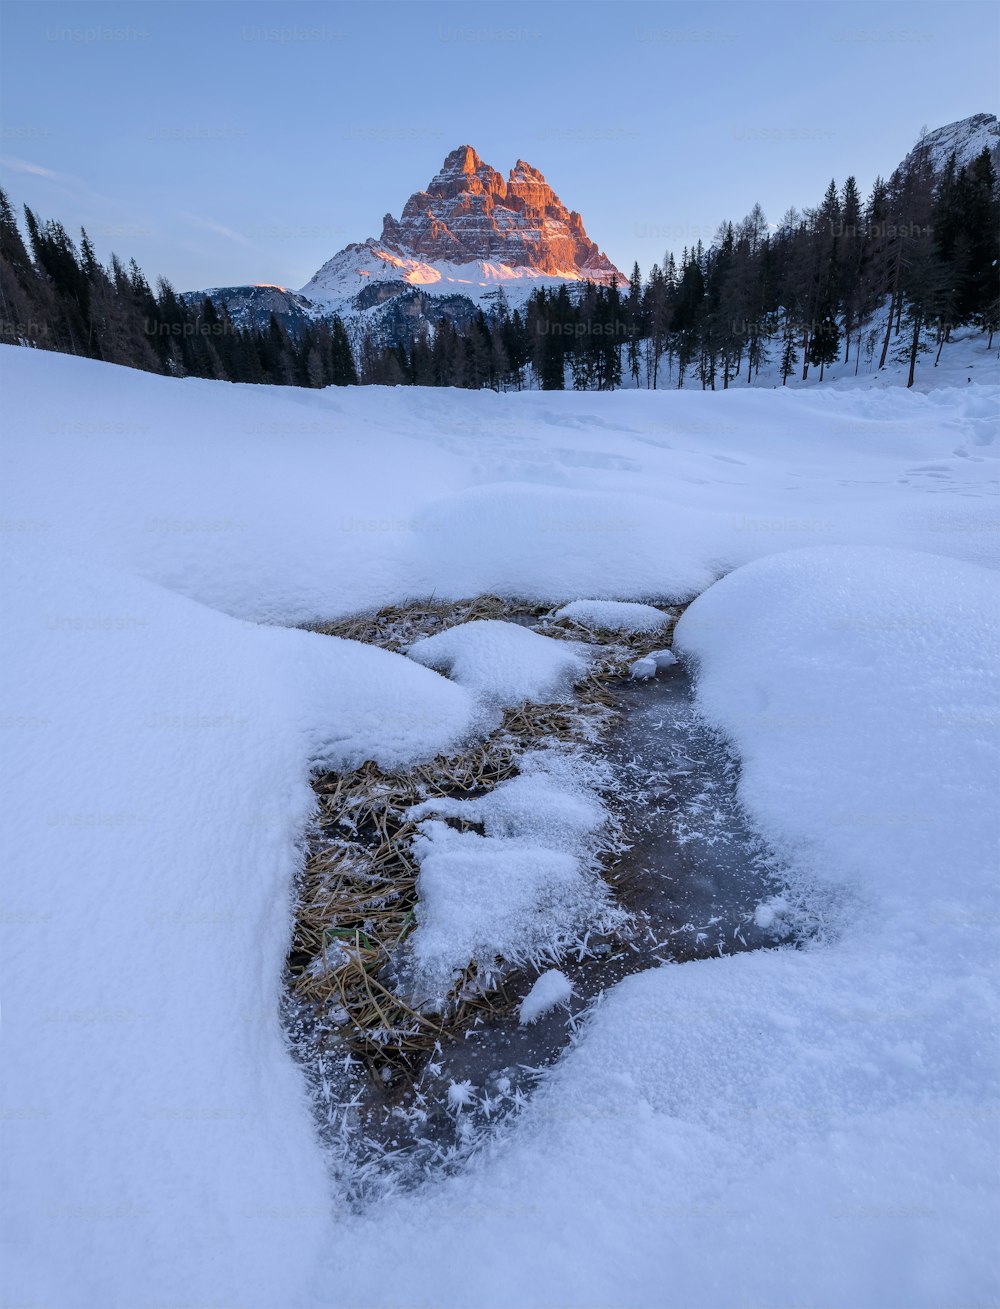 a snowy landscape with a mountain in the background